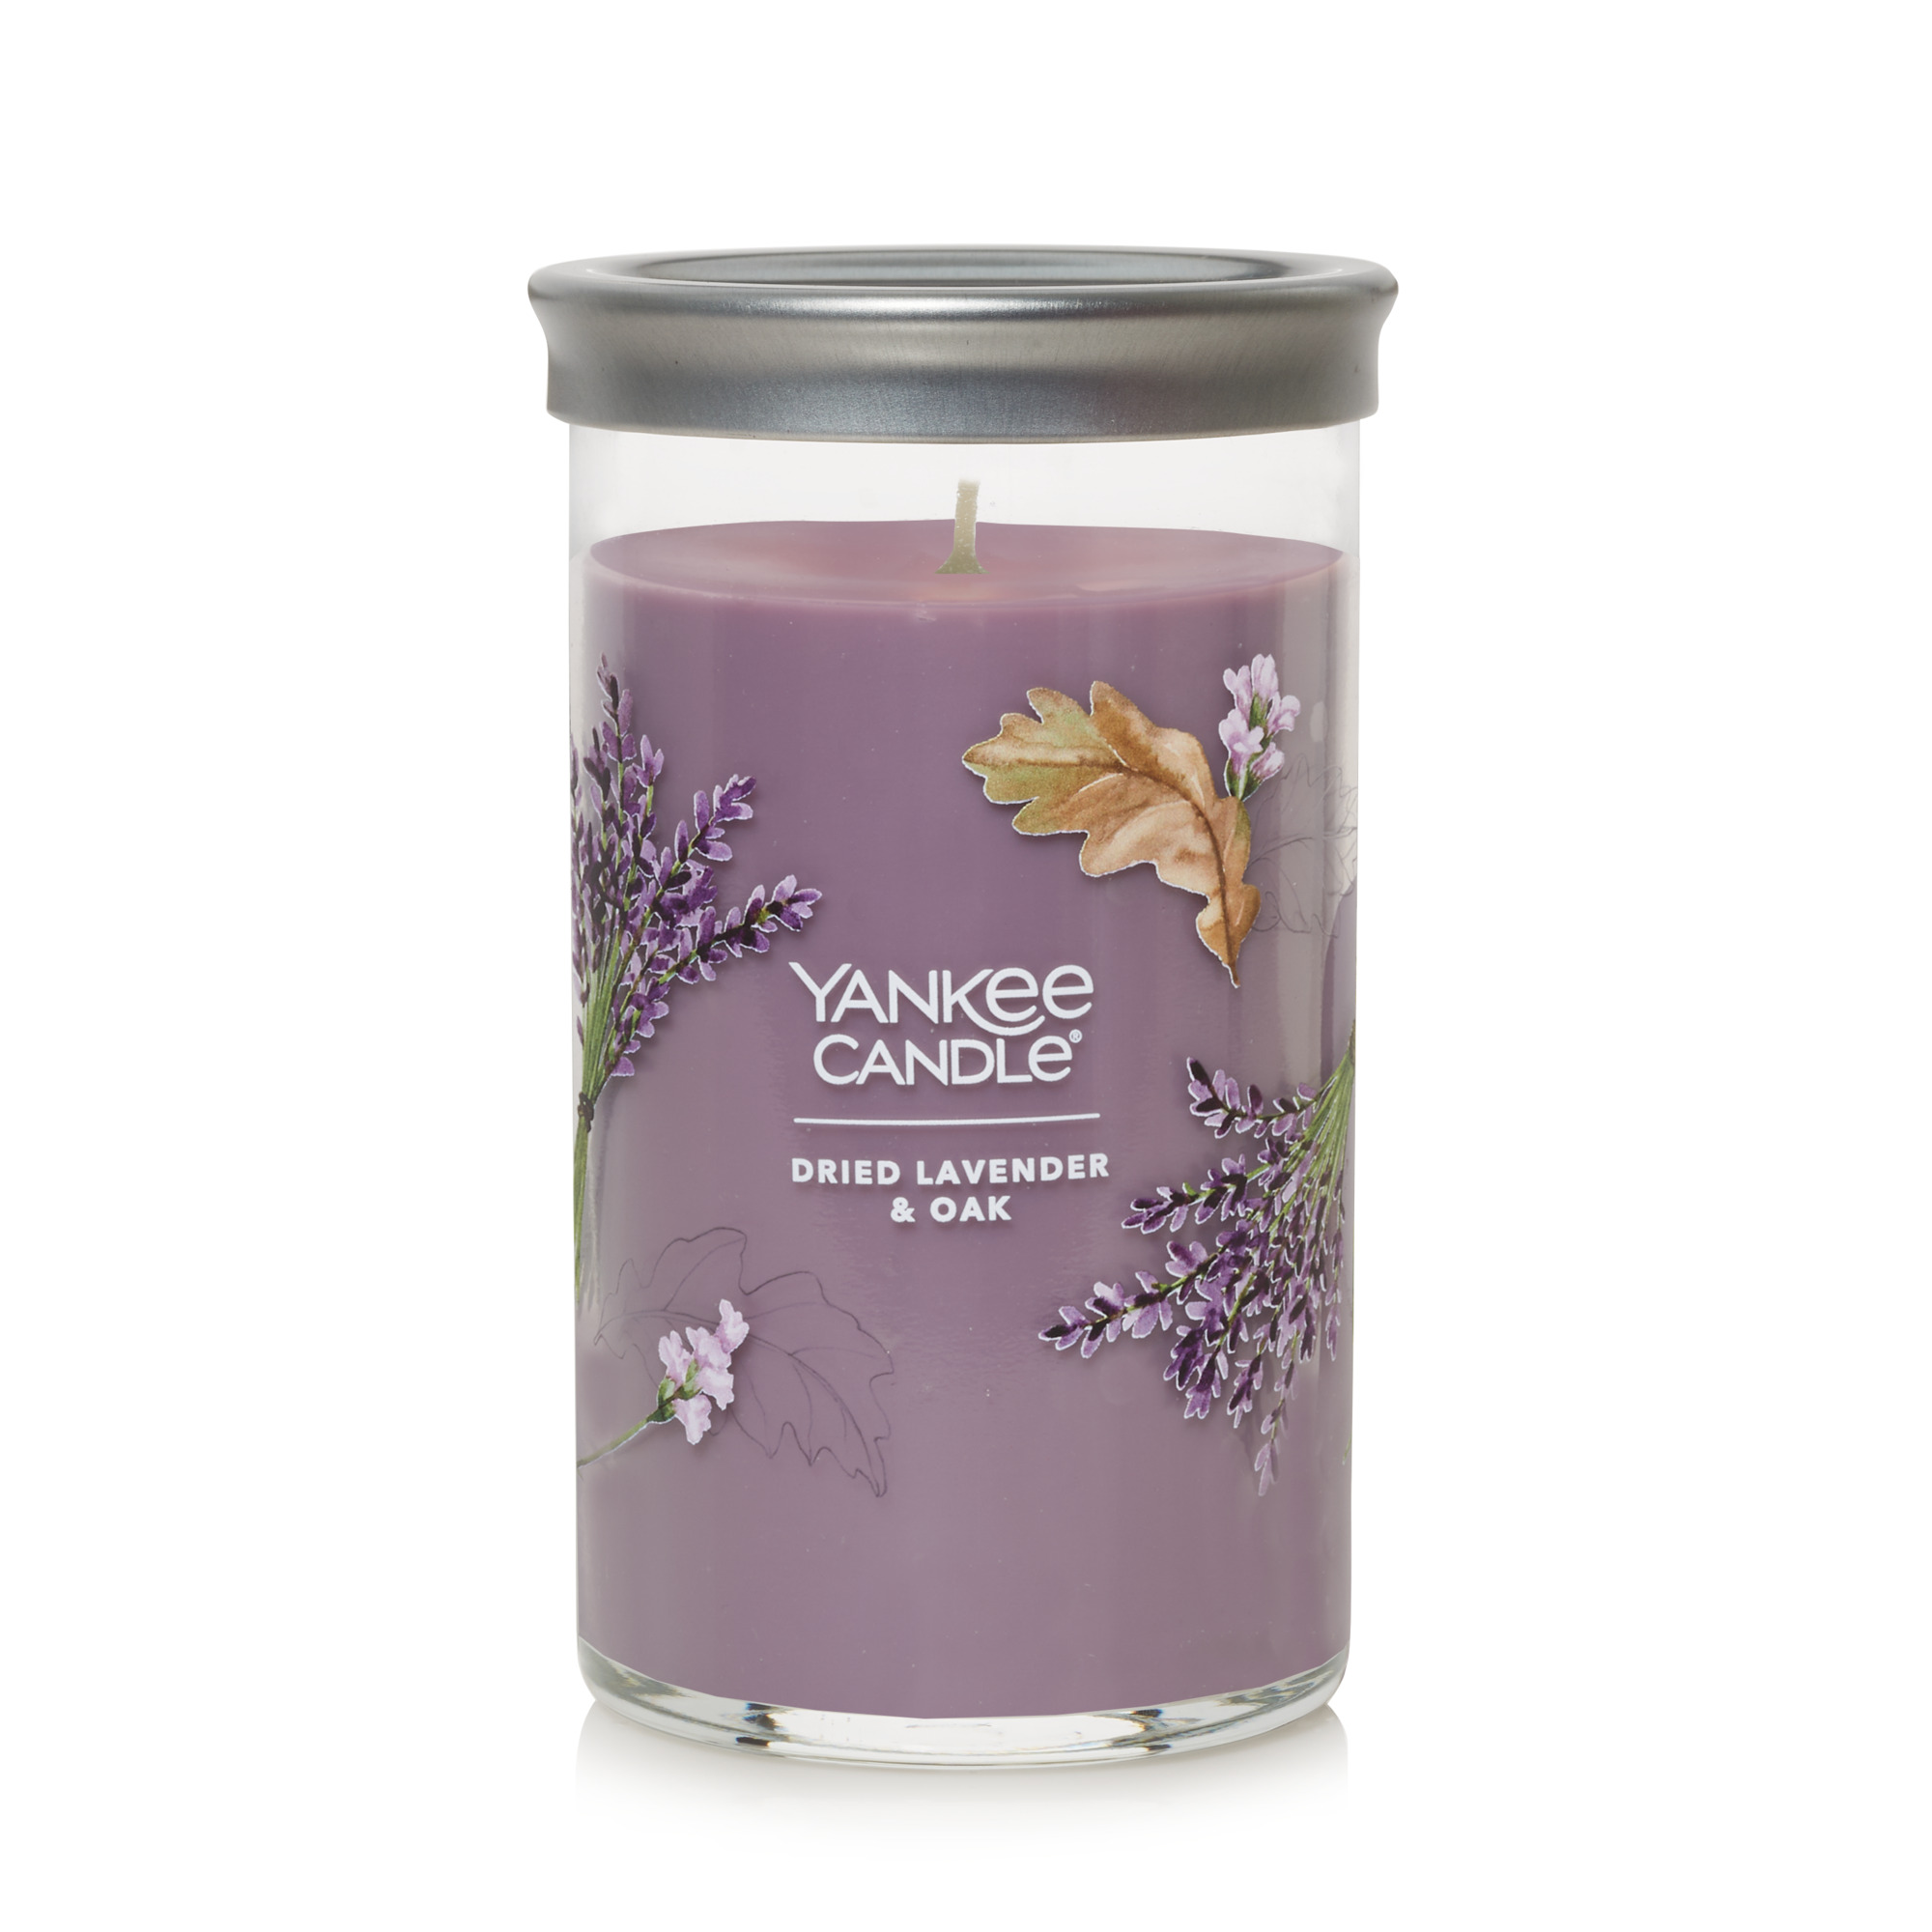 Yankee Candle Dried Lavender & Oak​ Signature Large Tumbler Candle, Purple, 1-Pieces - image 1 of 6